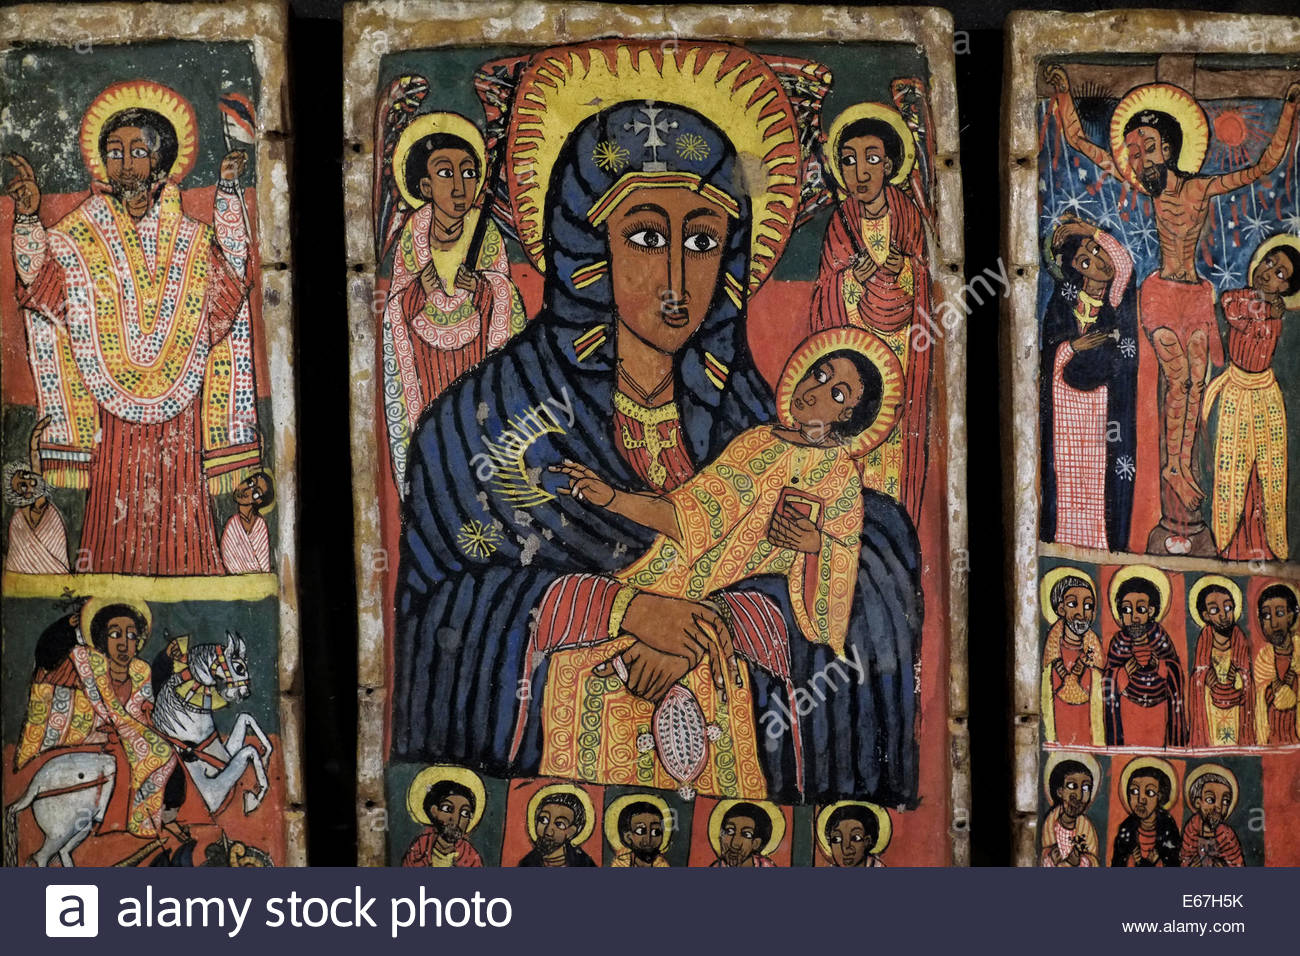 icon-depicting-virgin-and-baby-jesus-tempera-on-wood-ethiopia-17th-E67H5K.jpg